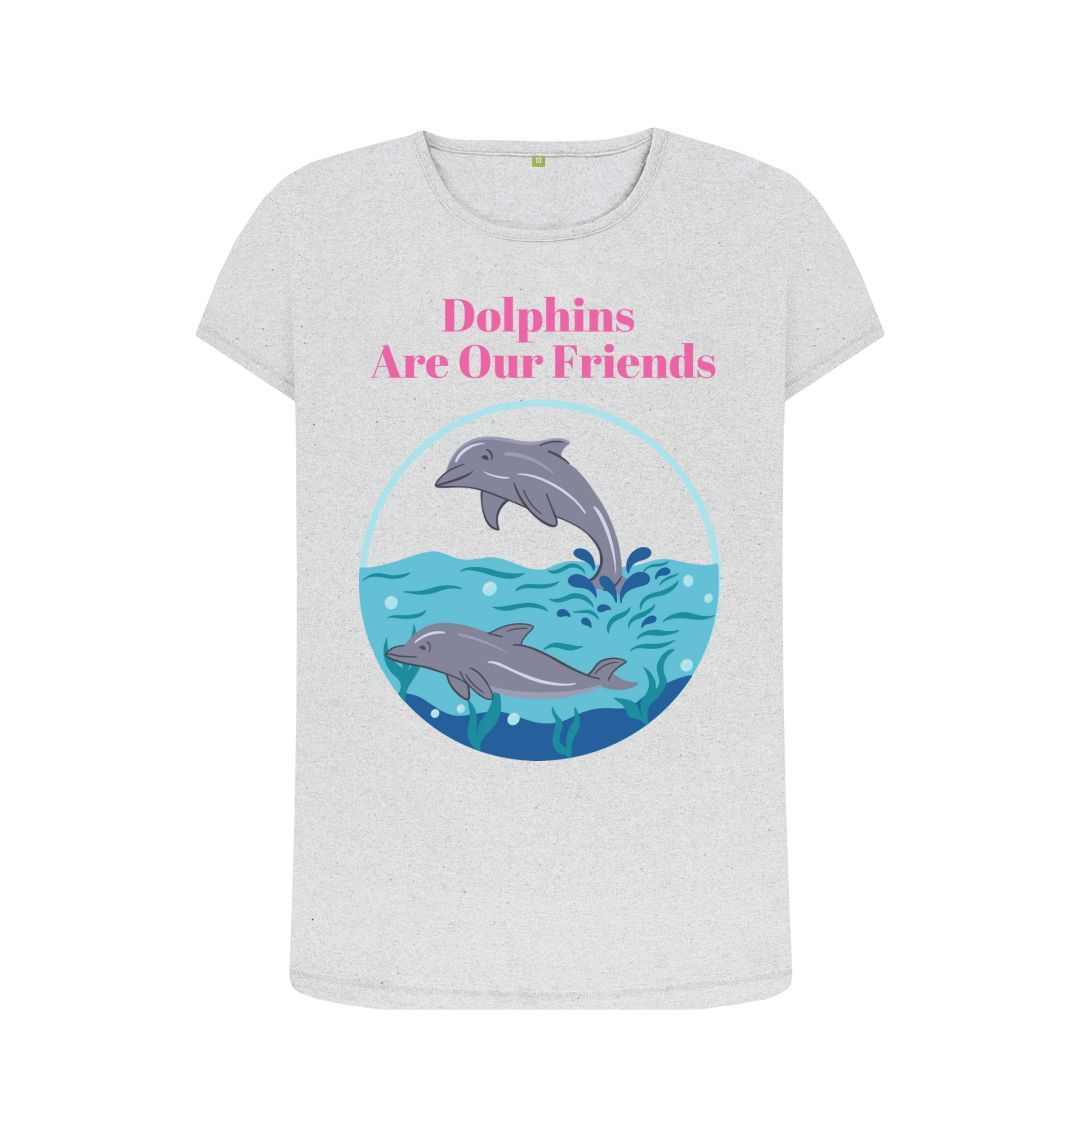 Grey Women's Sustainable T-Shirt - Dolphins Are Our Friends: Protecting Ocean Harmony